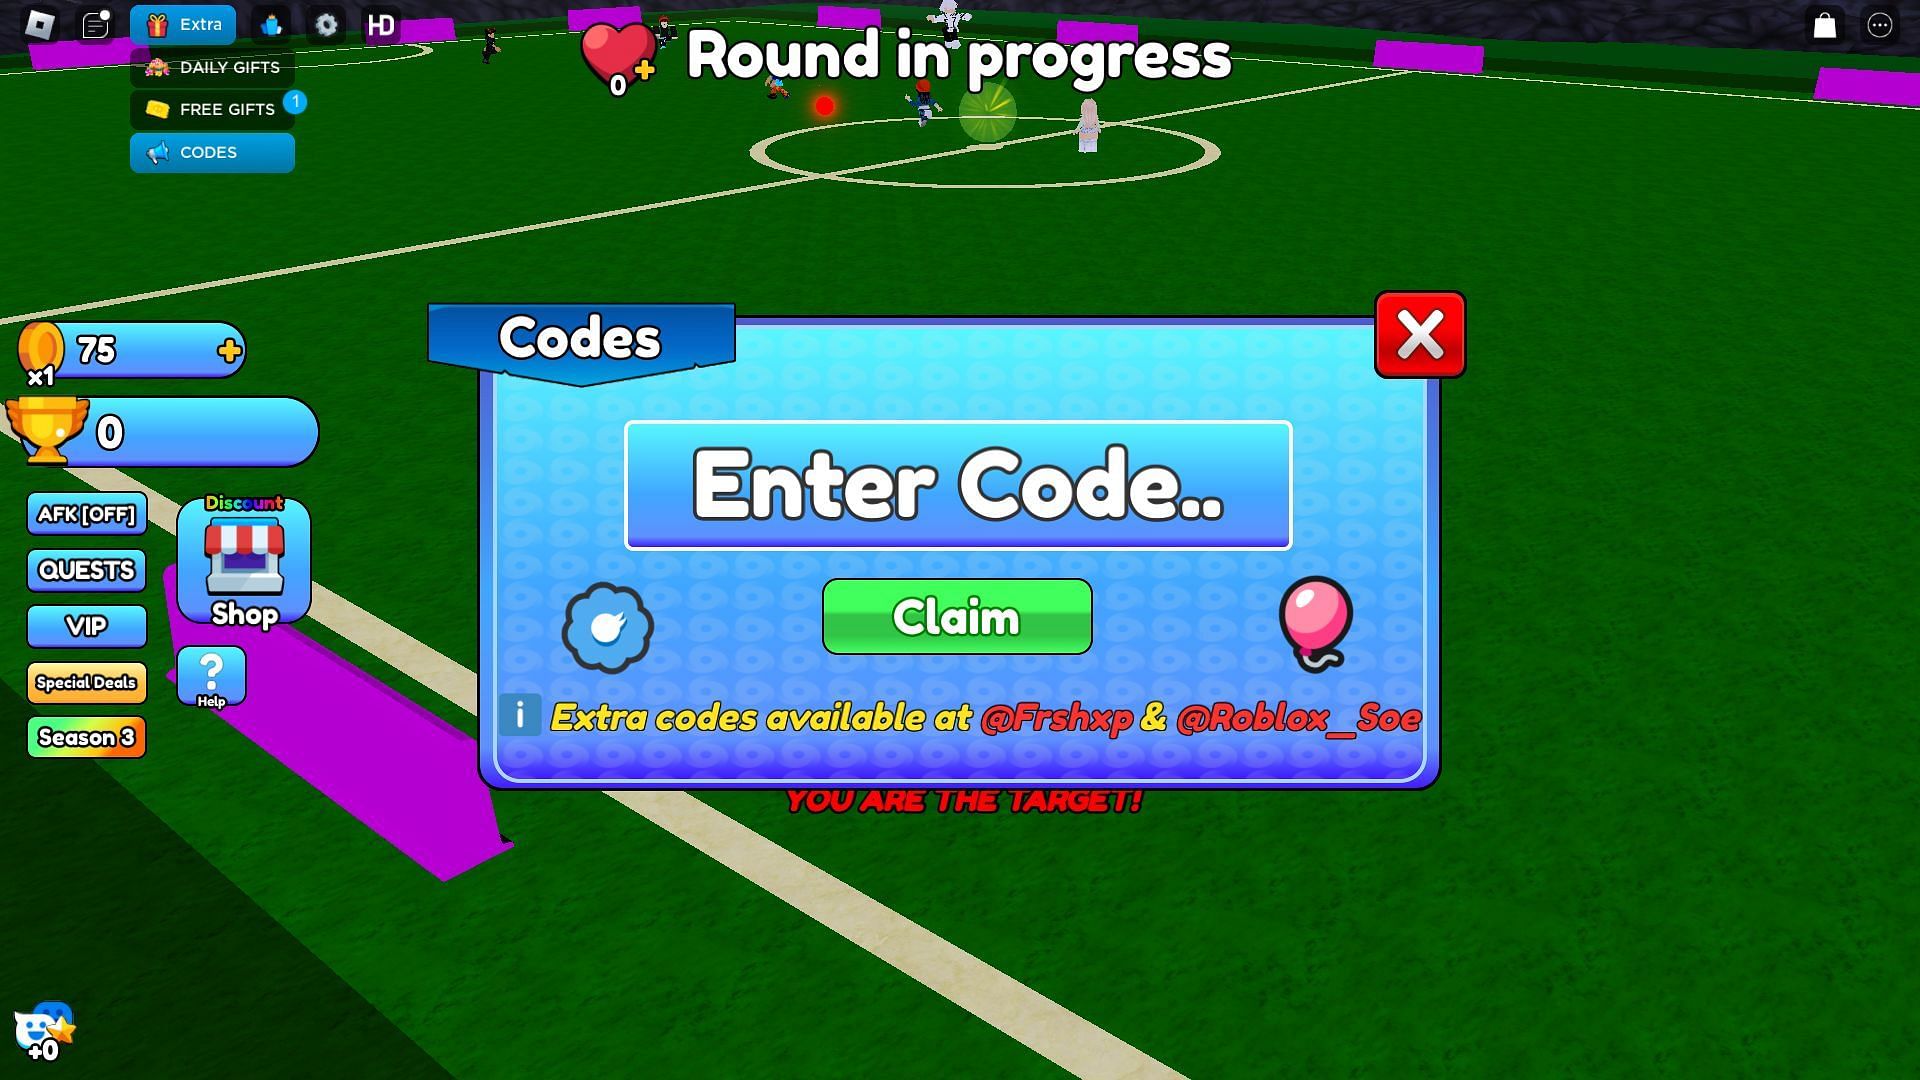 Active codes for Soccer Ball (Image via Roblox)